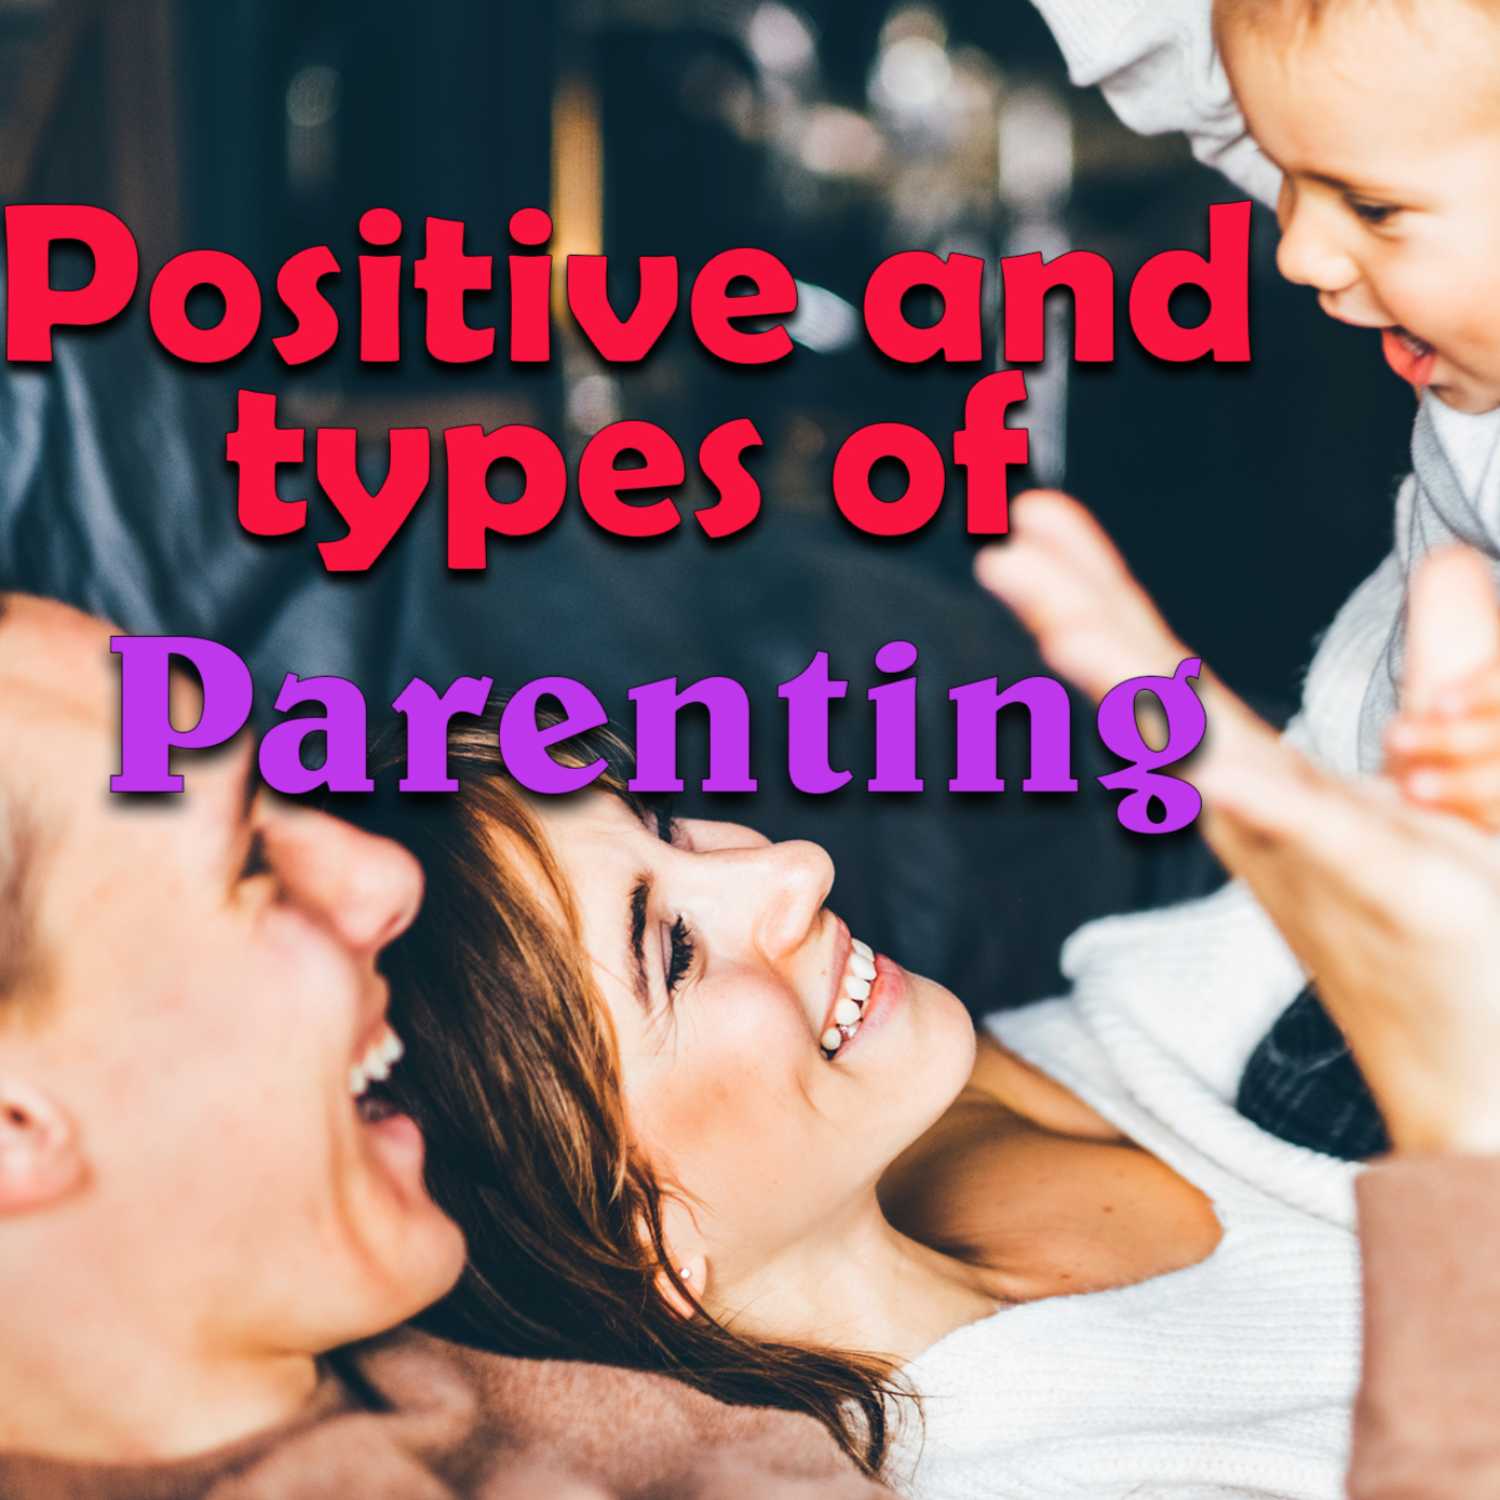 Different types of parenting and how do we apply it to our baby?